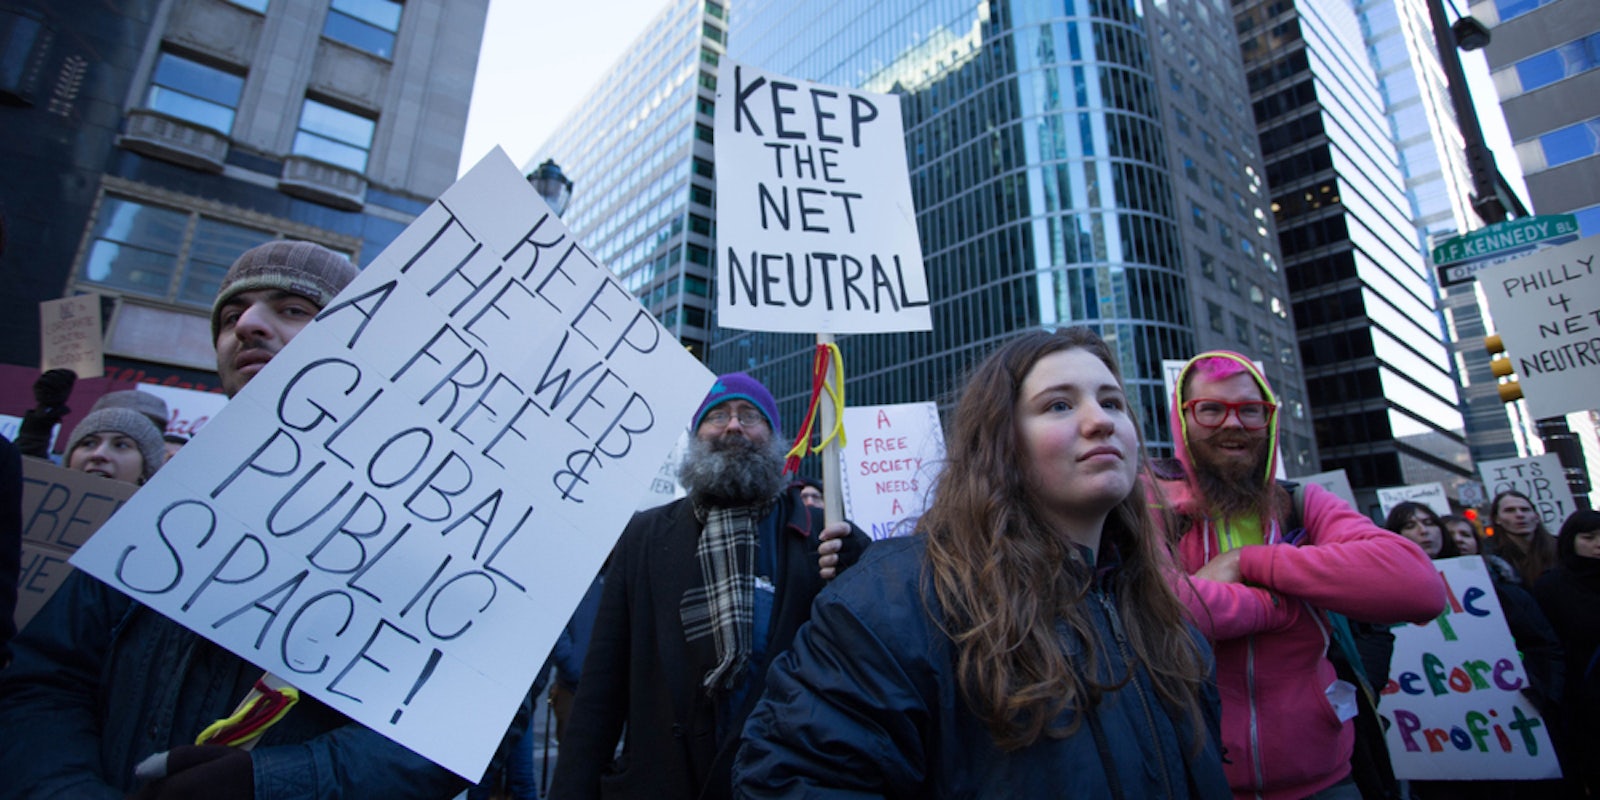 Protestors advocating for net neutrality rally outside the headquarters of the Comcast Corporation